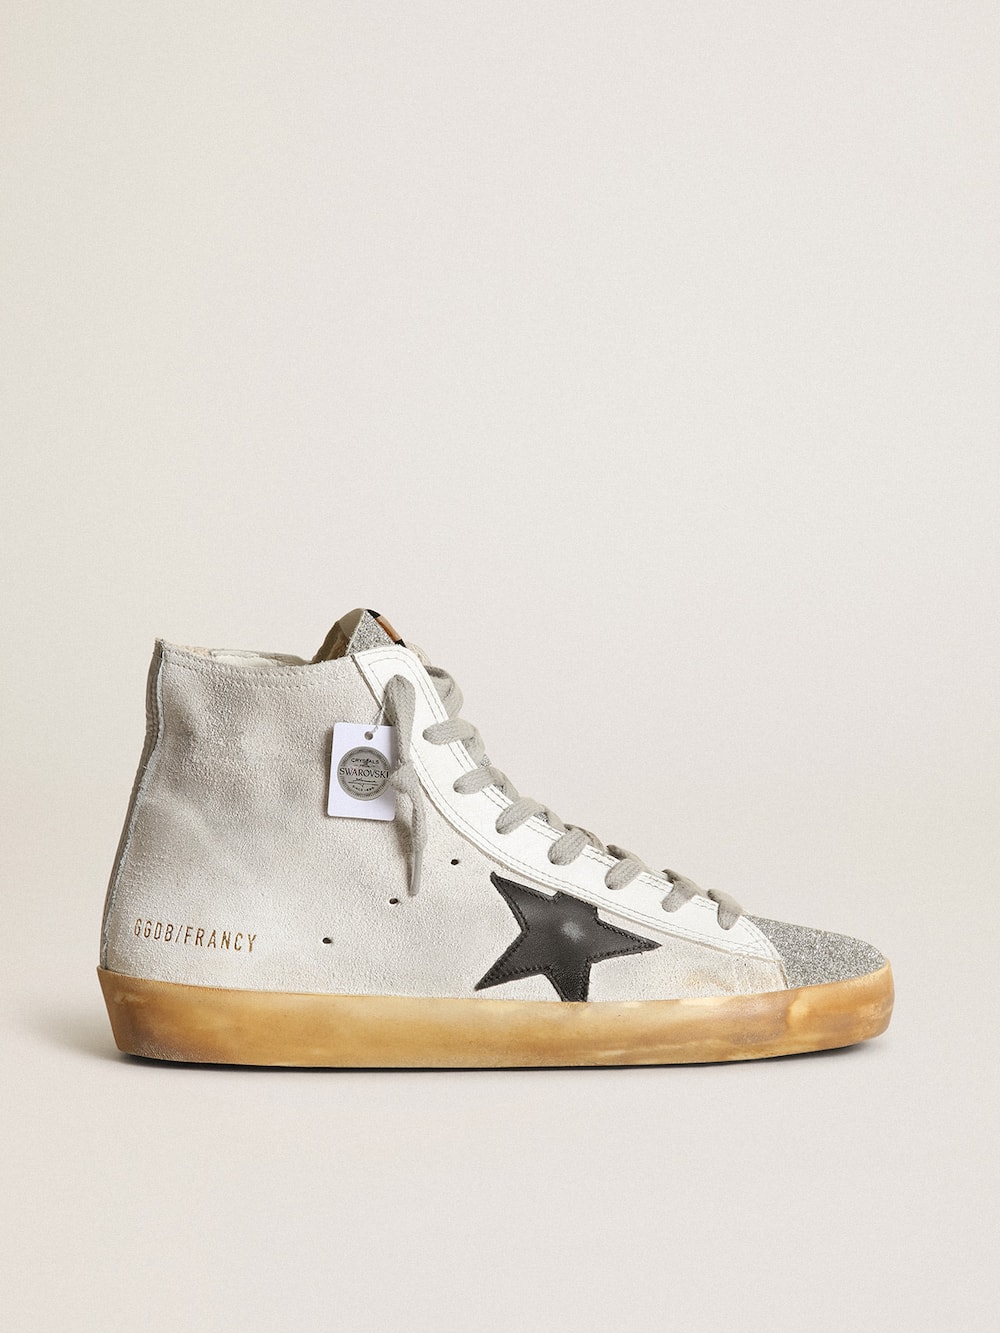 Golden Goose - Women’s Francy in white suede with black leather star in 